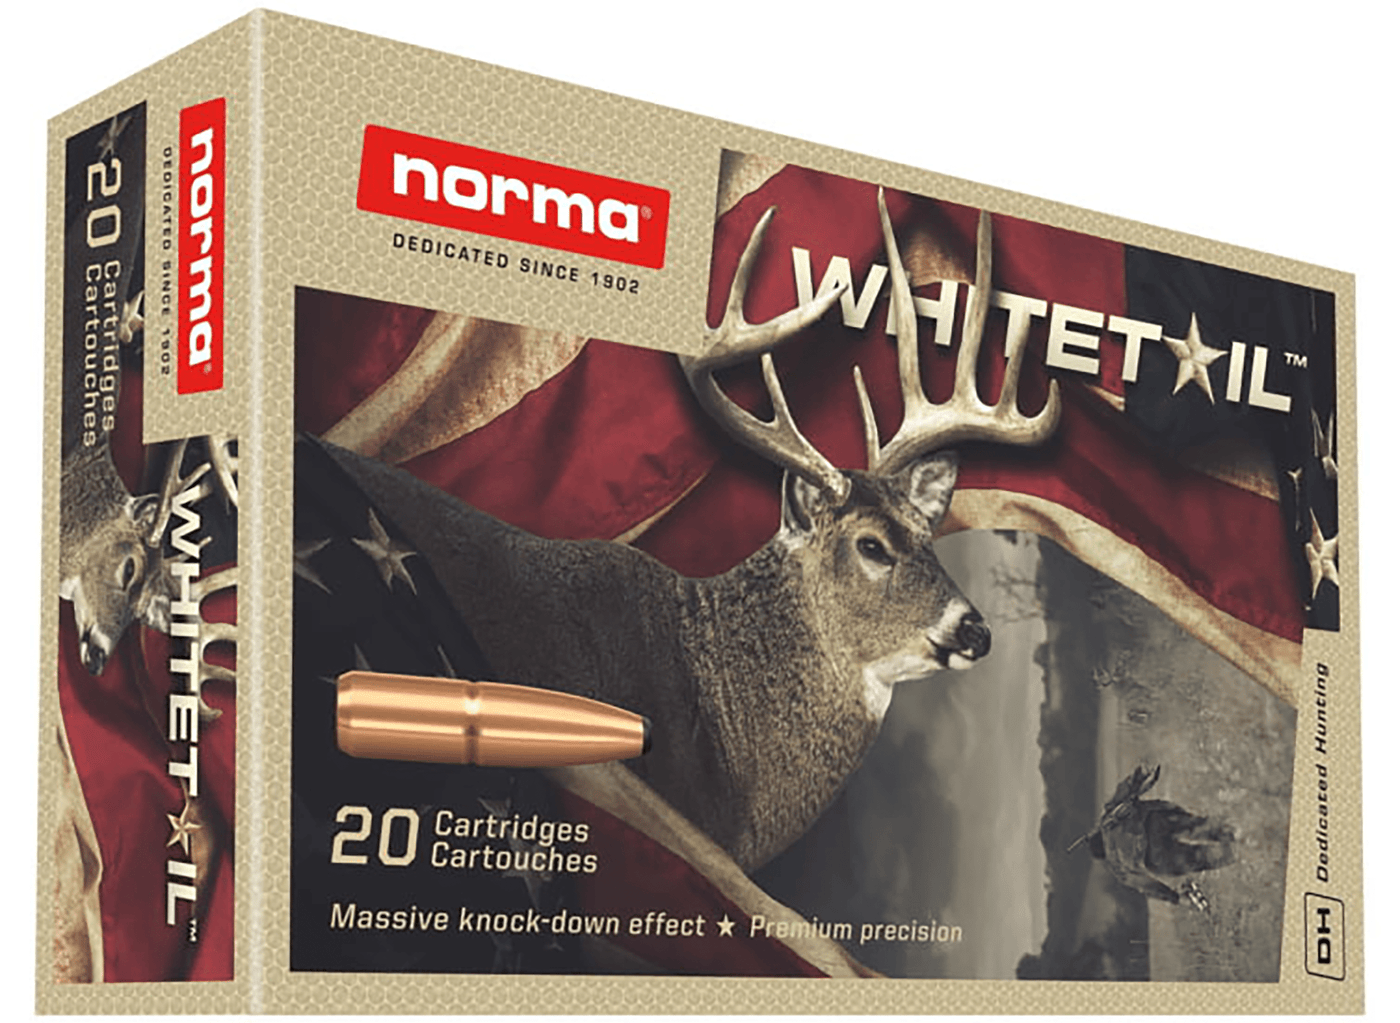 NORMA AMMUNITION (RUAG) Norma Ammunition (ruag) Whitetail, Norma 20169562 270 Win 130gr Psp Whitetail   20/10 Ammo